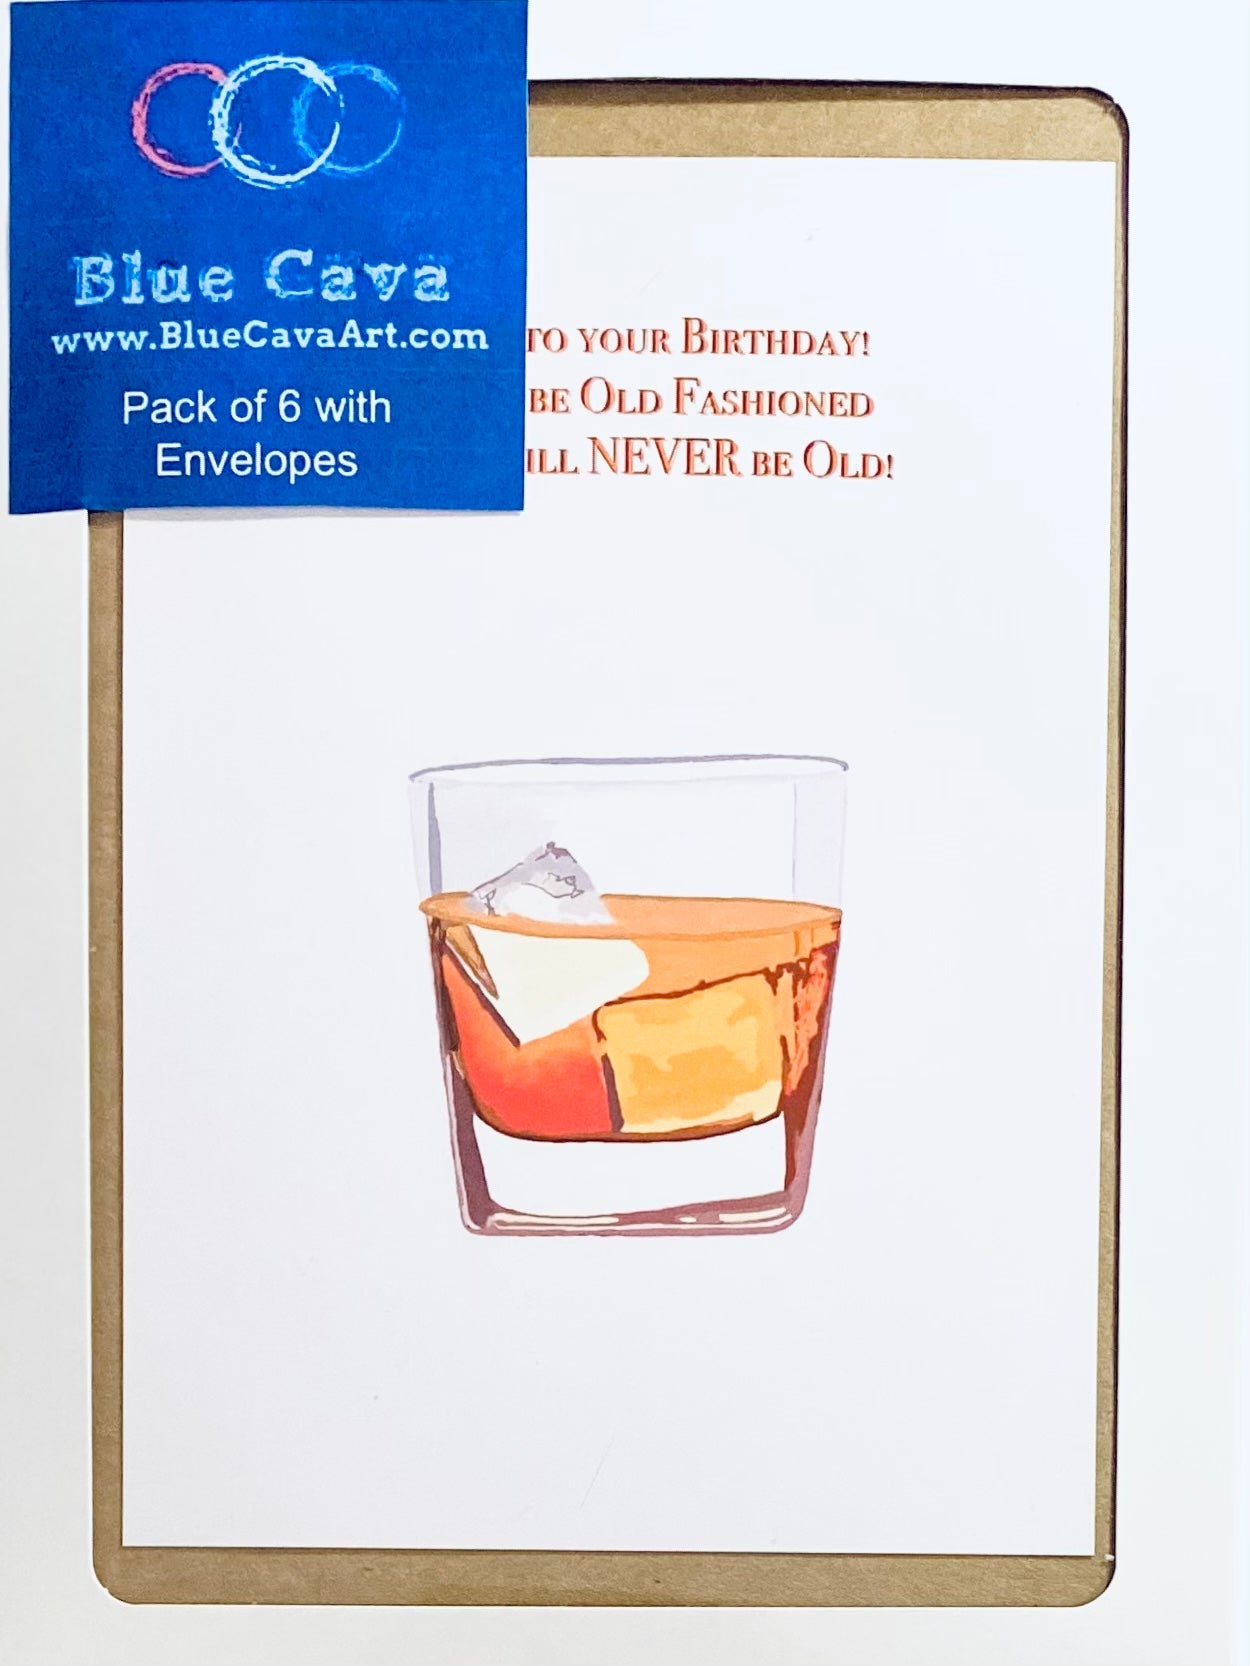 Old Fashioned Greeting cards (two colors available) - Blue Cava